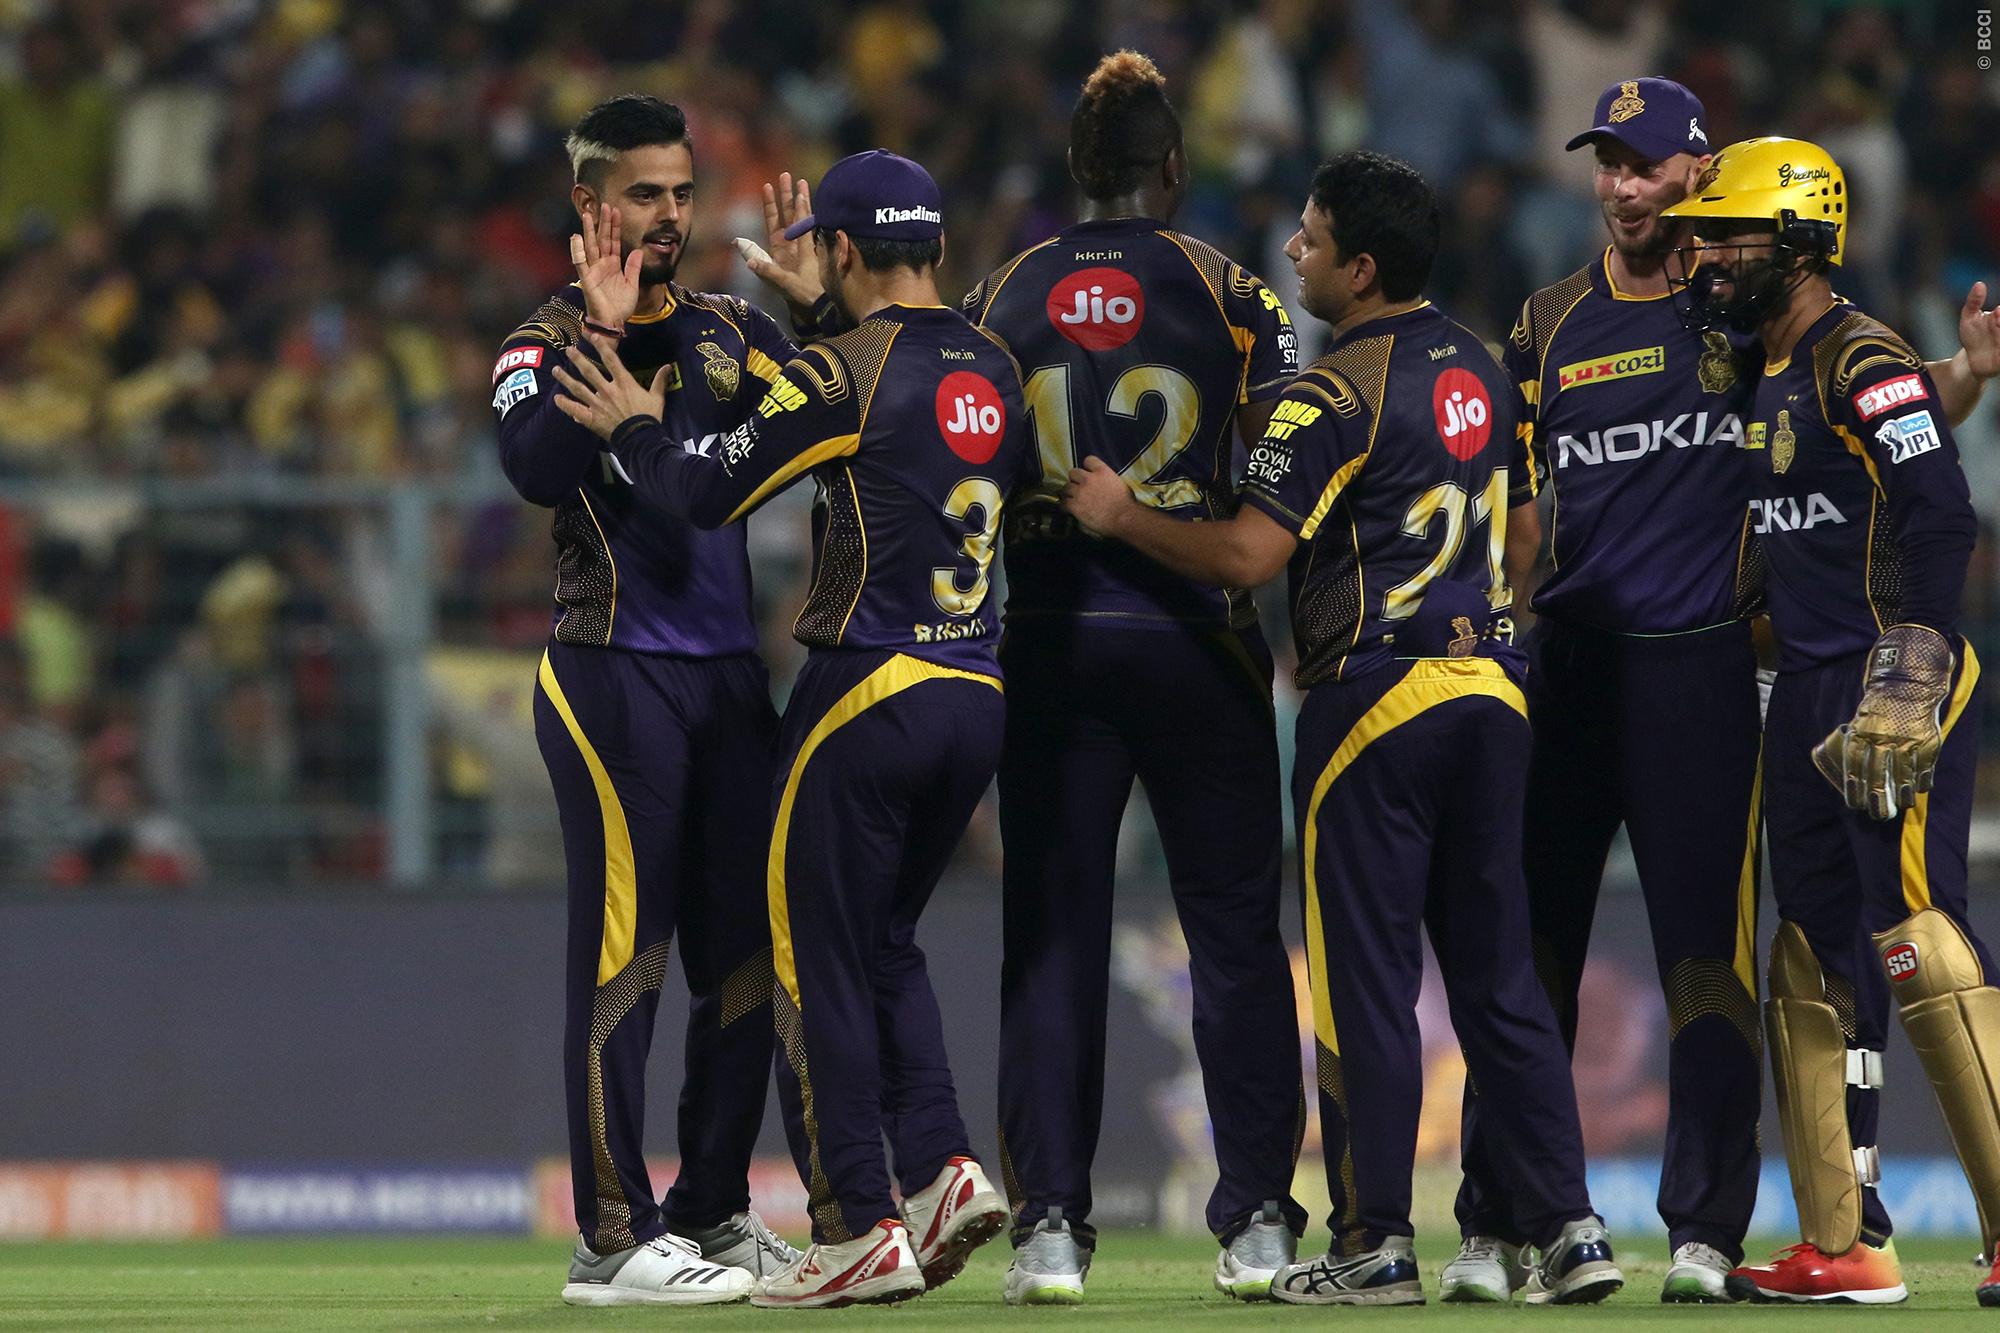 MI vs KKR | Player Ratings - Failure to capitalise on batting-friendly conditions cost KKR a berth in playoffs